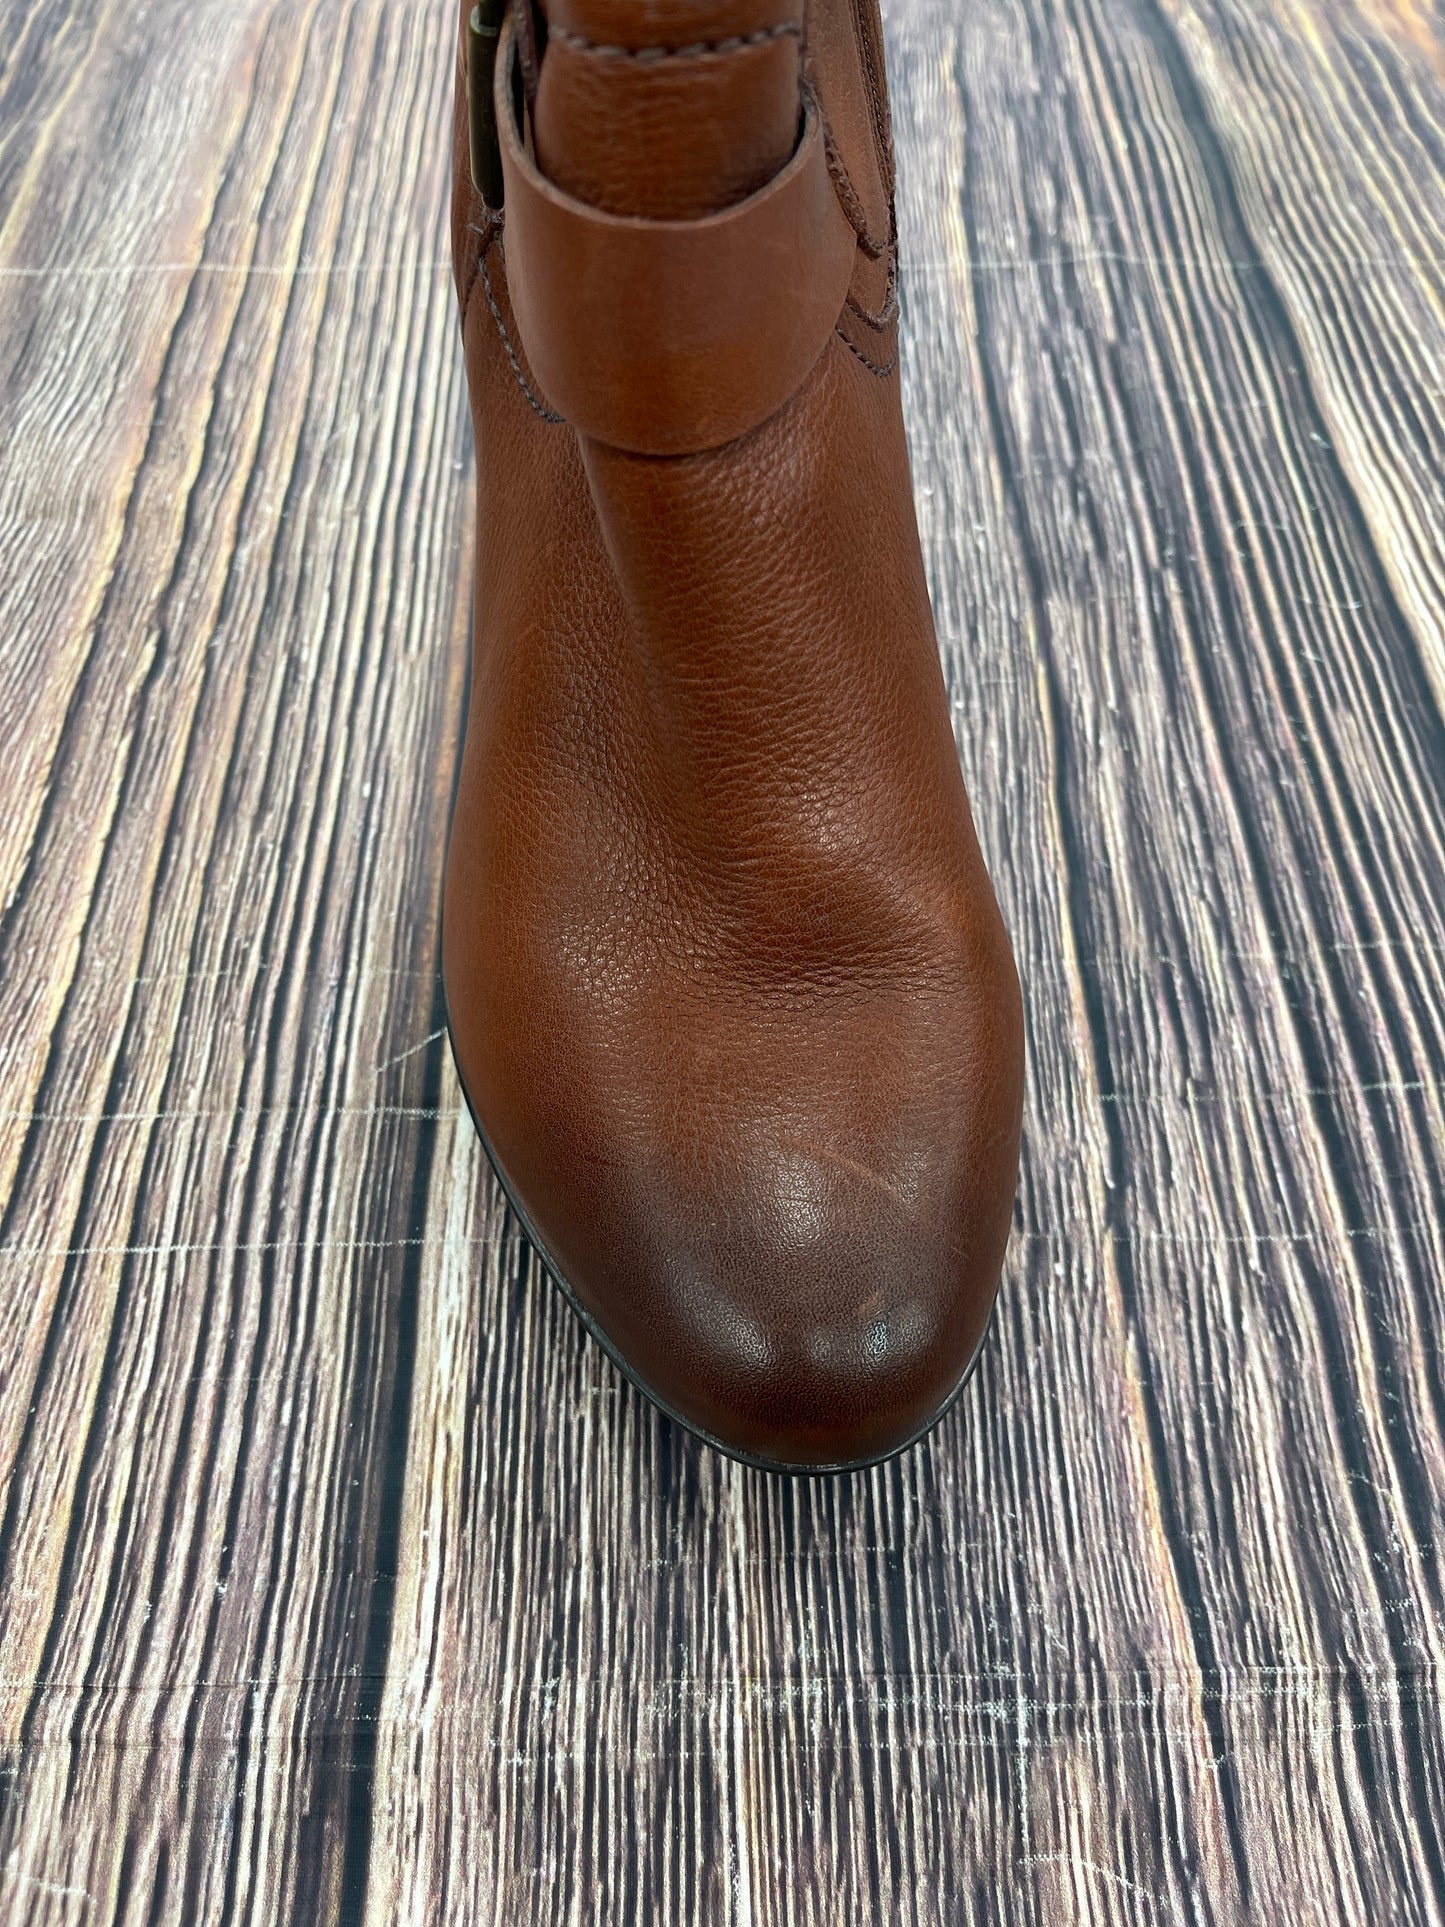 Boots Mid-calf Heels By Clarks  Size: 11